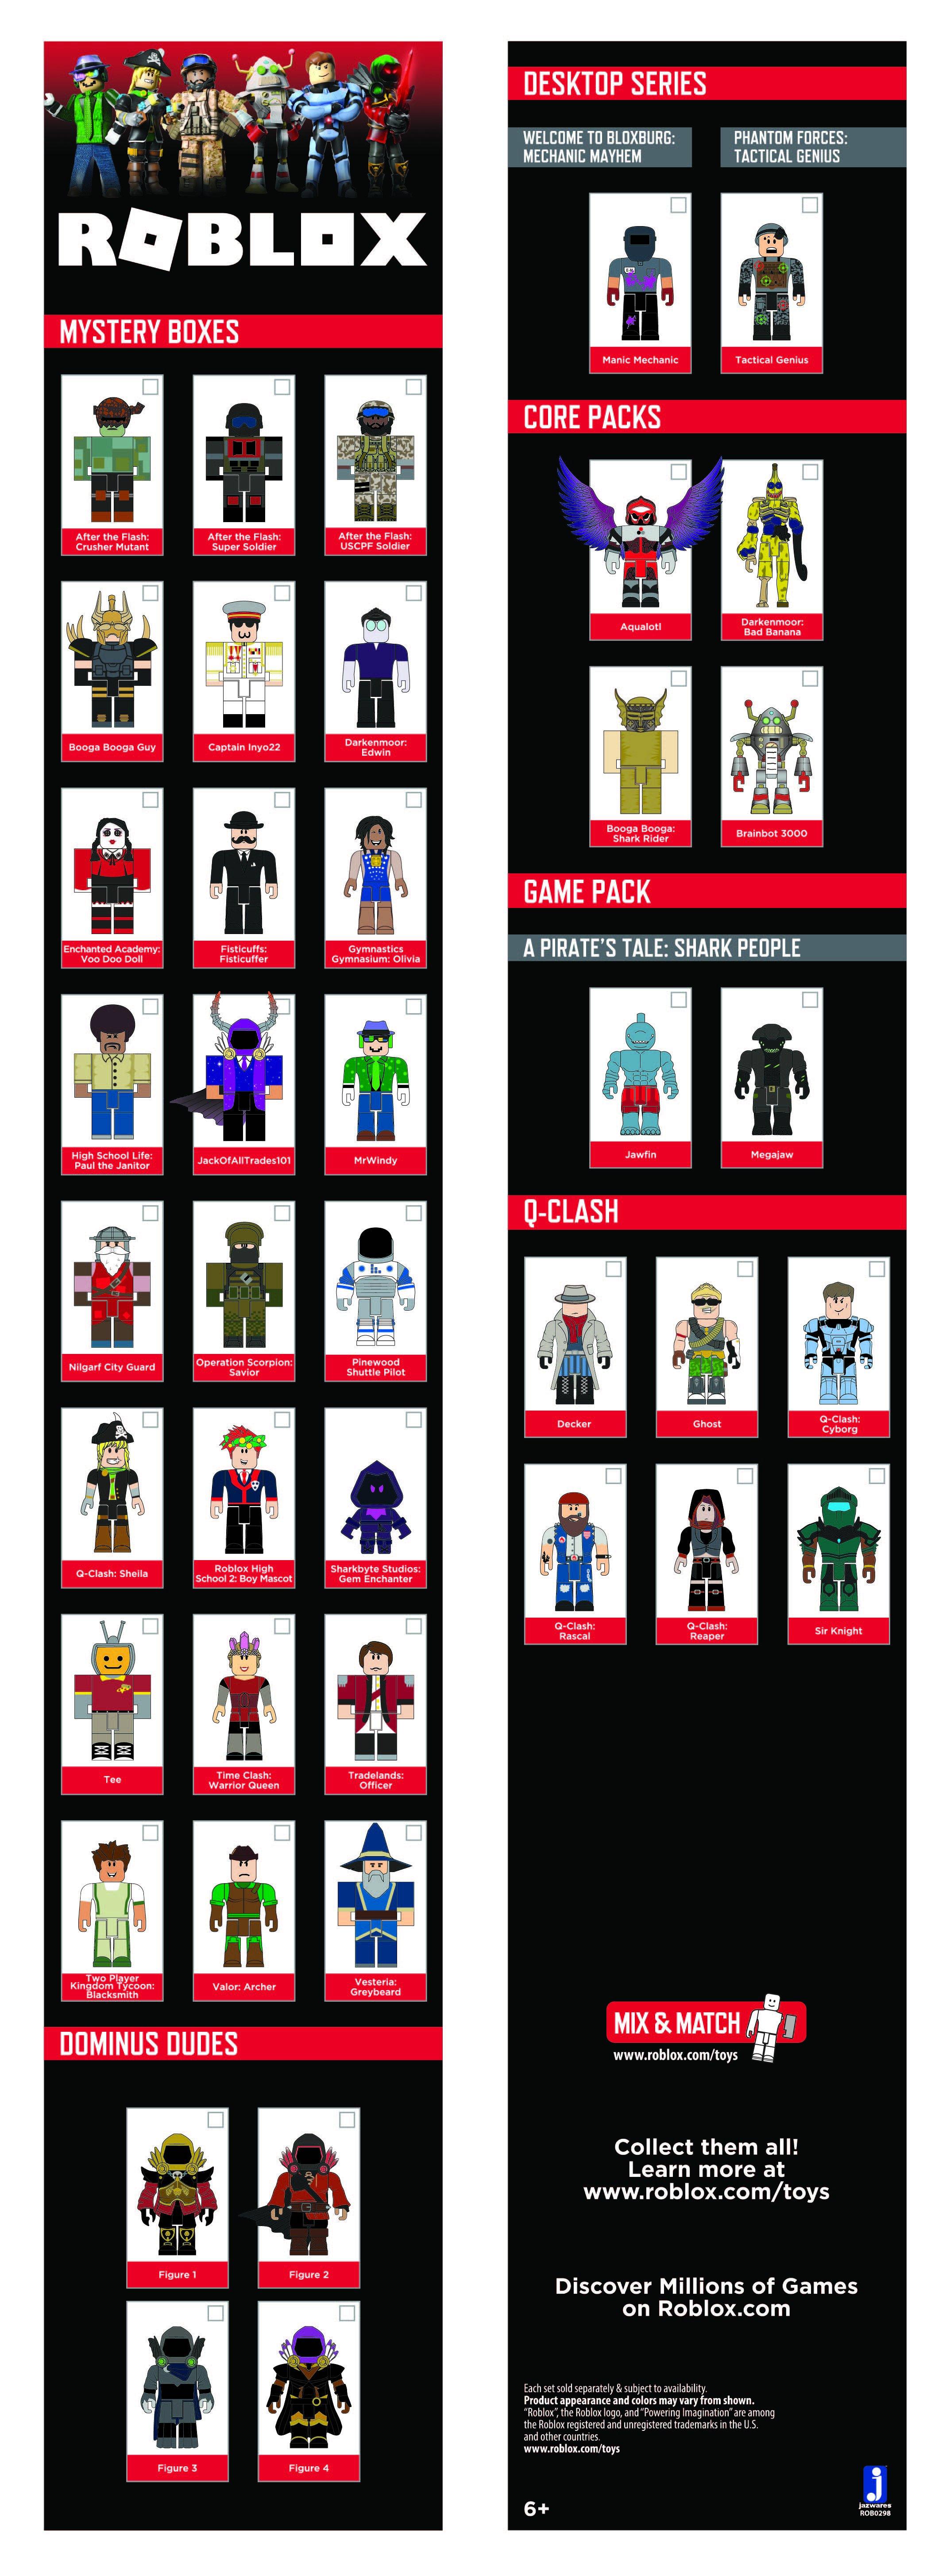 Roblox Action Collection Series 7 Mystery Figure Includes 1 Figure And Exclusive Virtual Item Gamestop - roblox mystery figures series 7